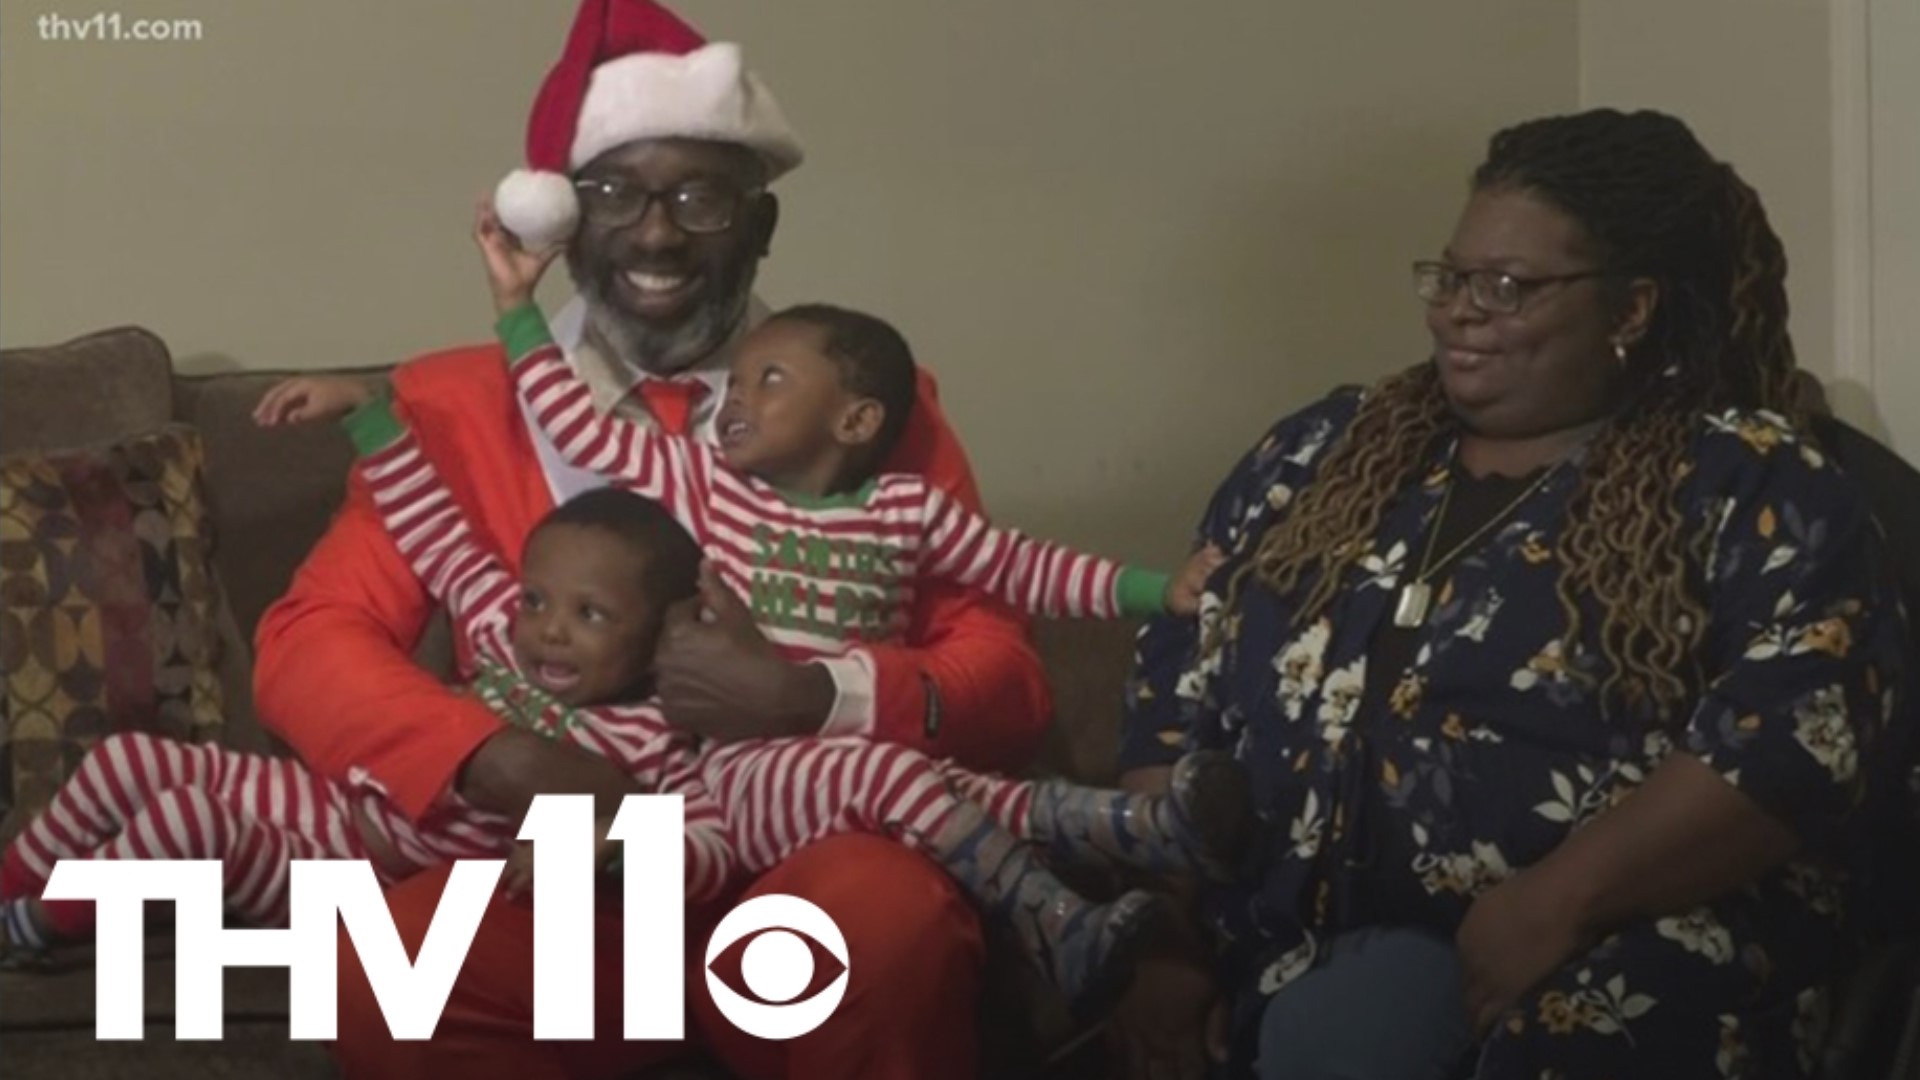 A self-proclaimed 'Black Santa' from Conway has been helping families across Arkansas for the past few years. His impact gets bigger every year.